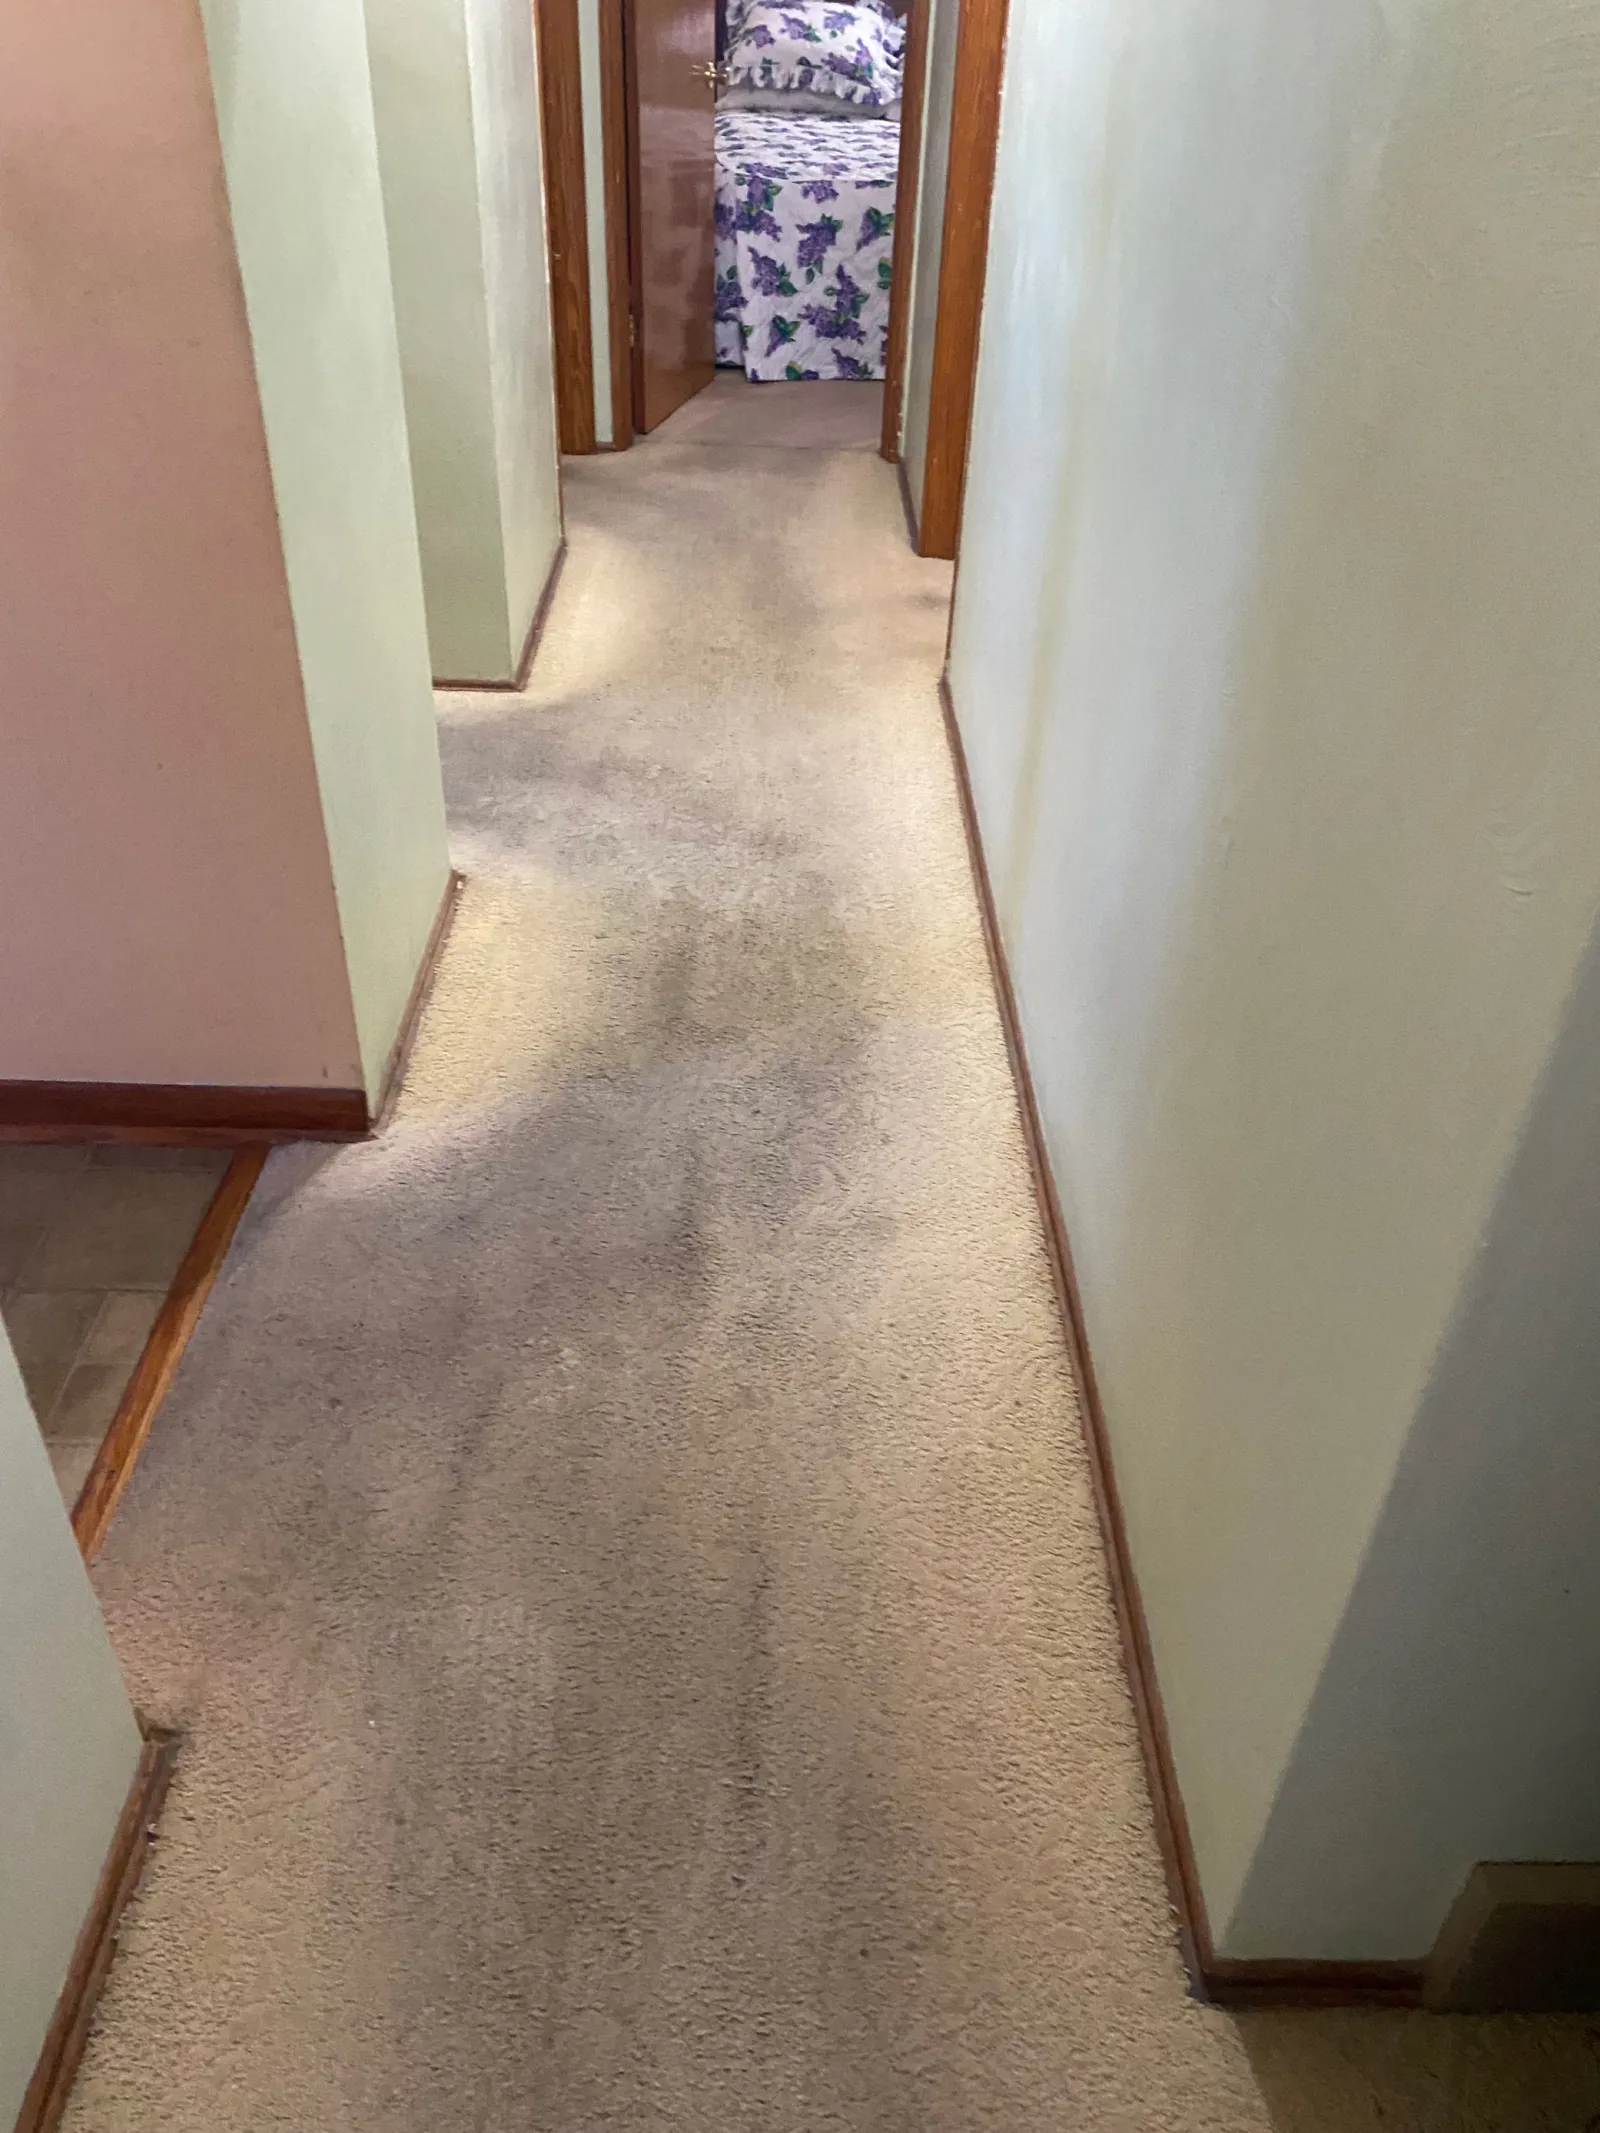 dirty and discolored carpet in hallway in need of cleaning